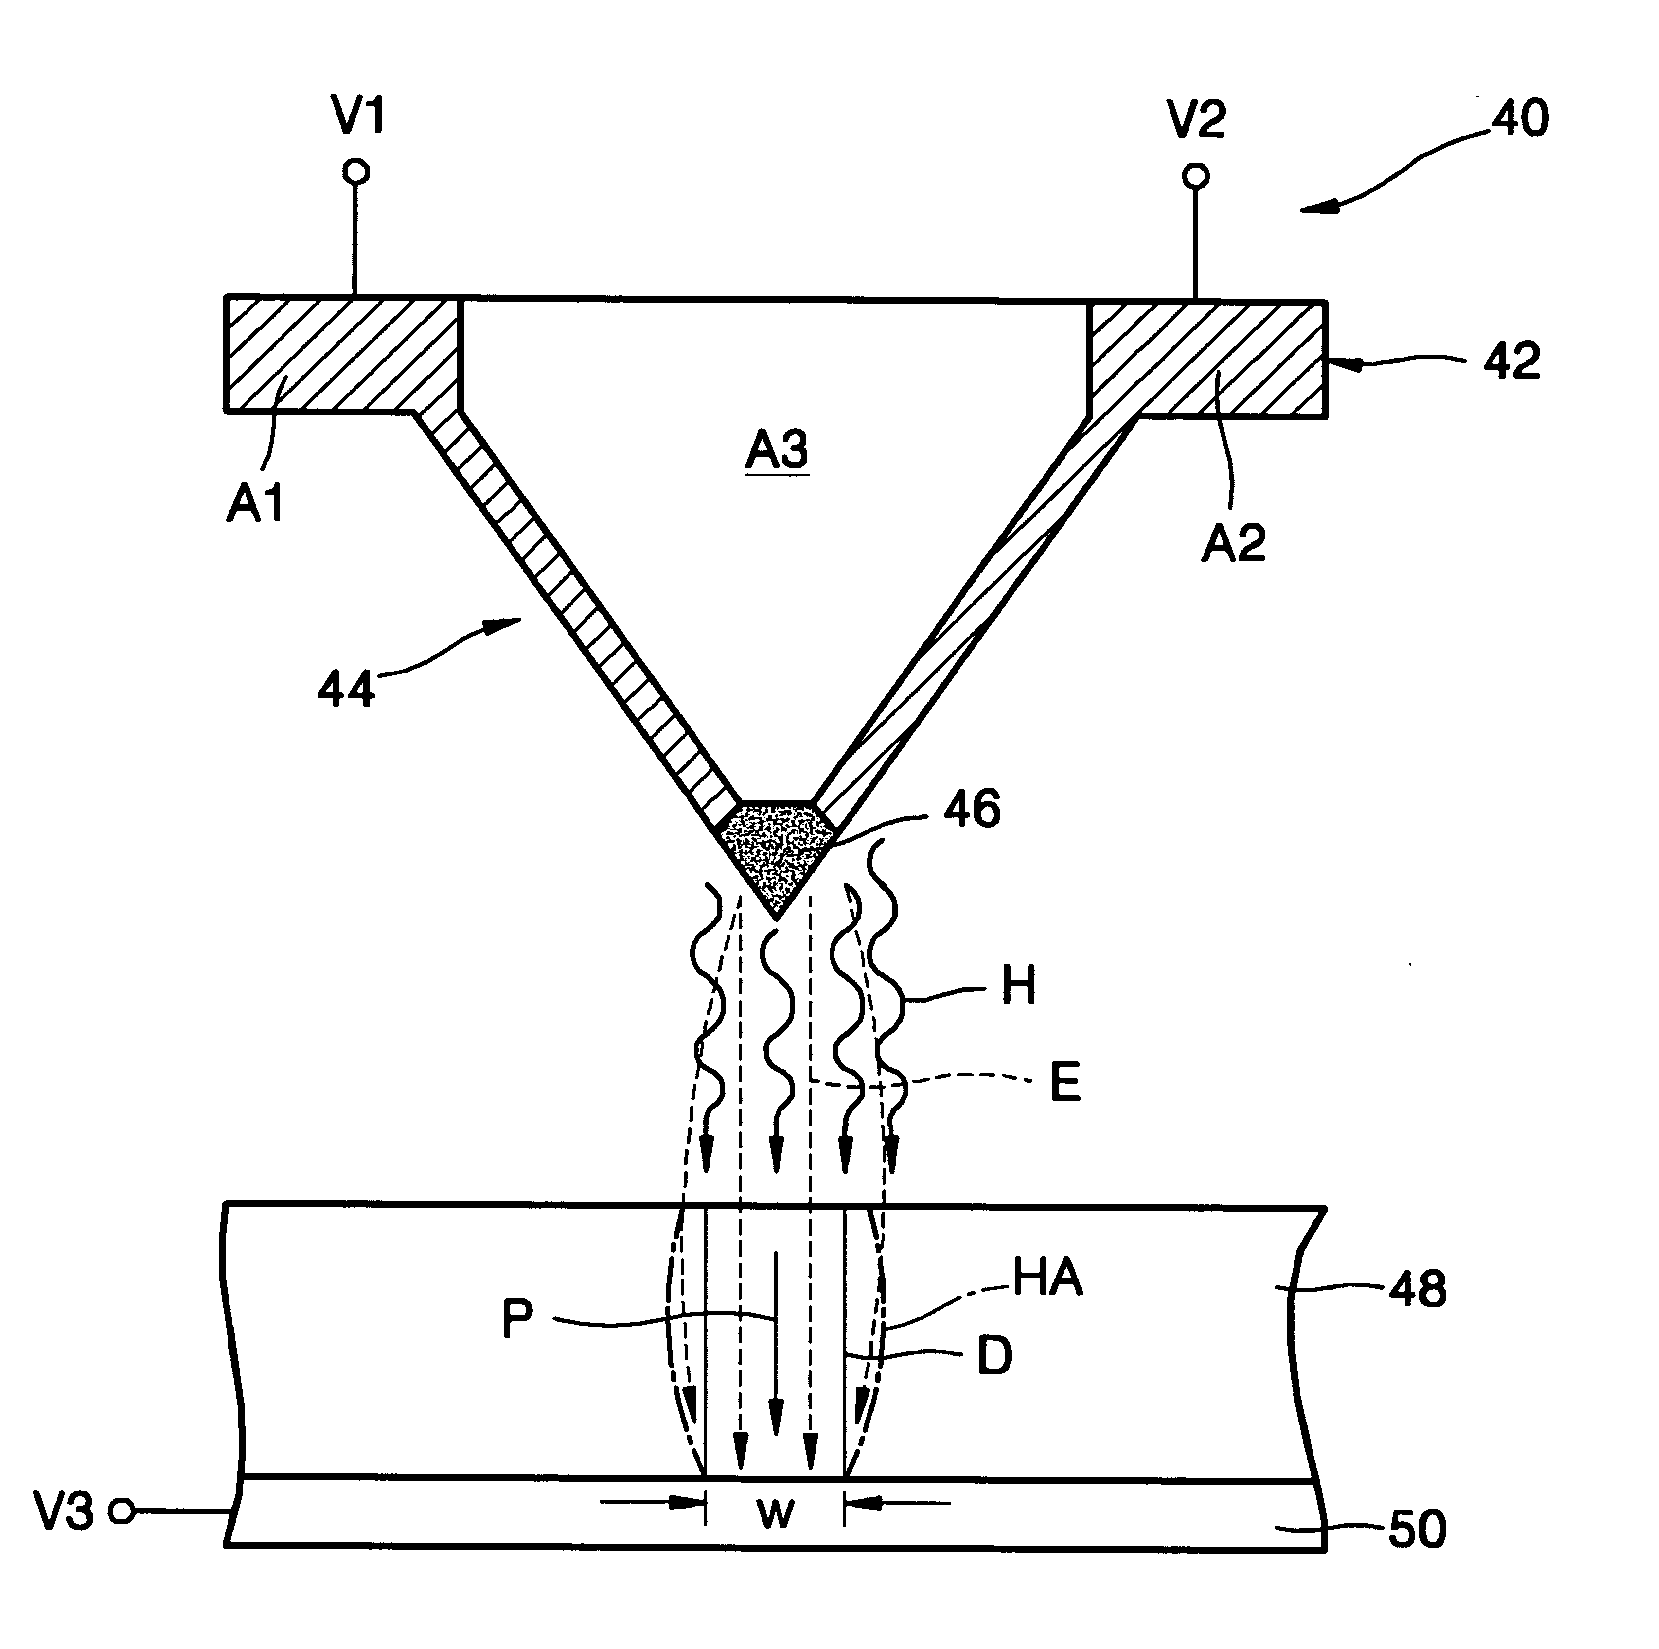 Method of writing data on a storage device using a probe technique